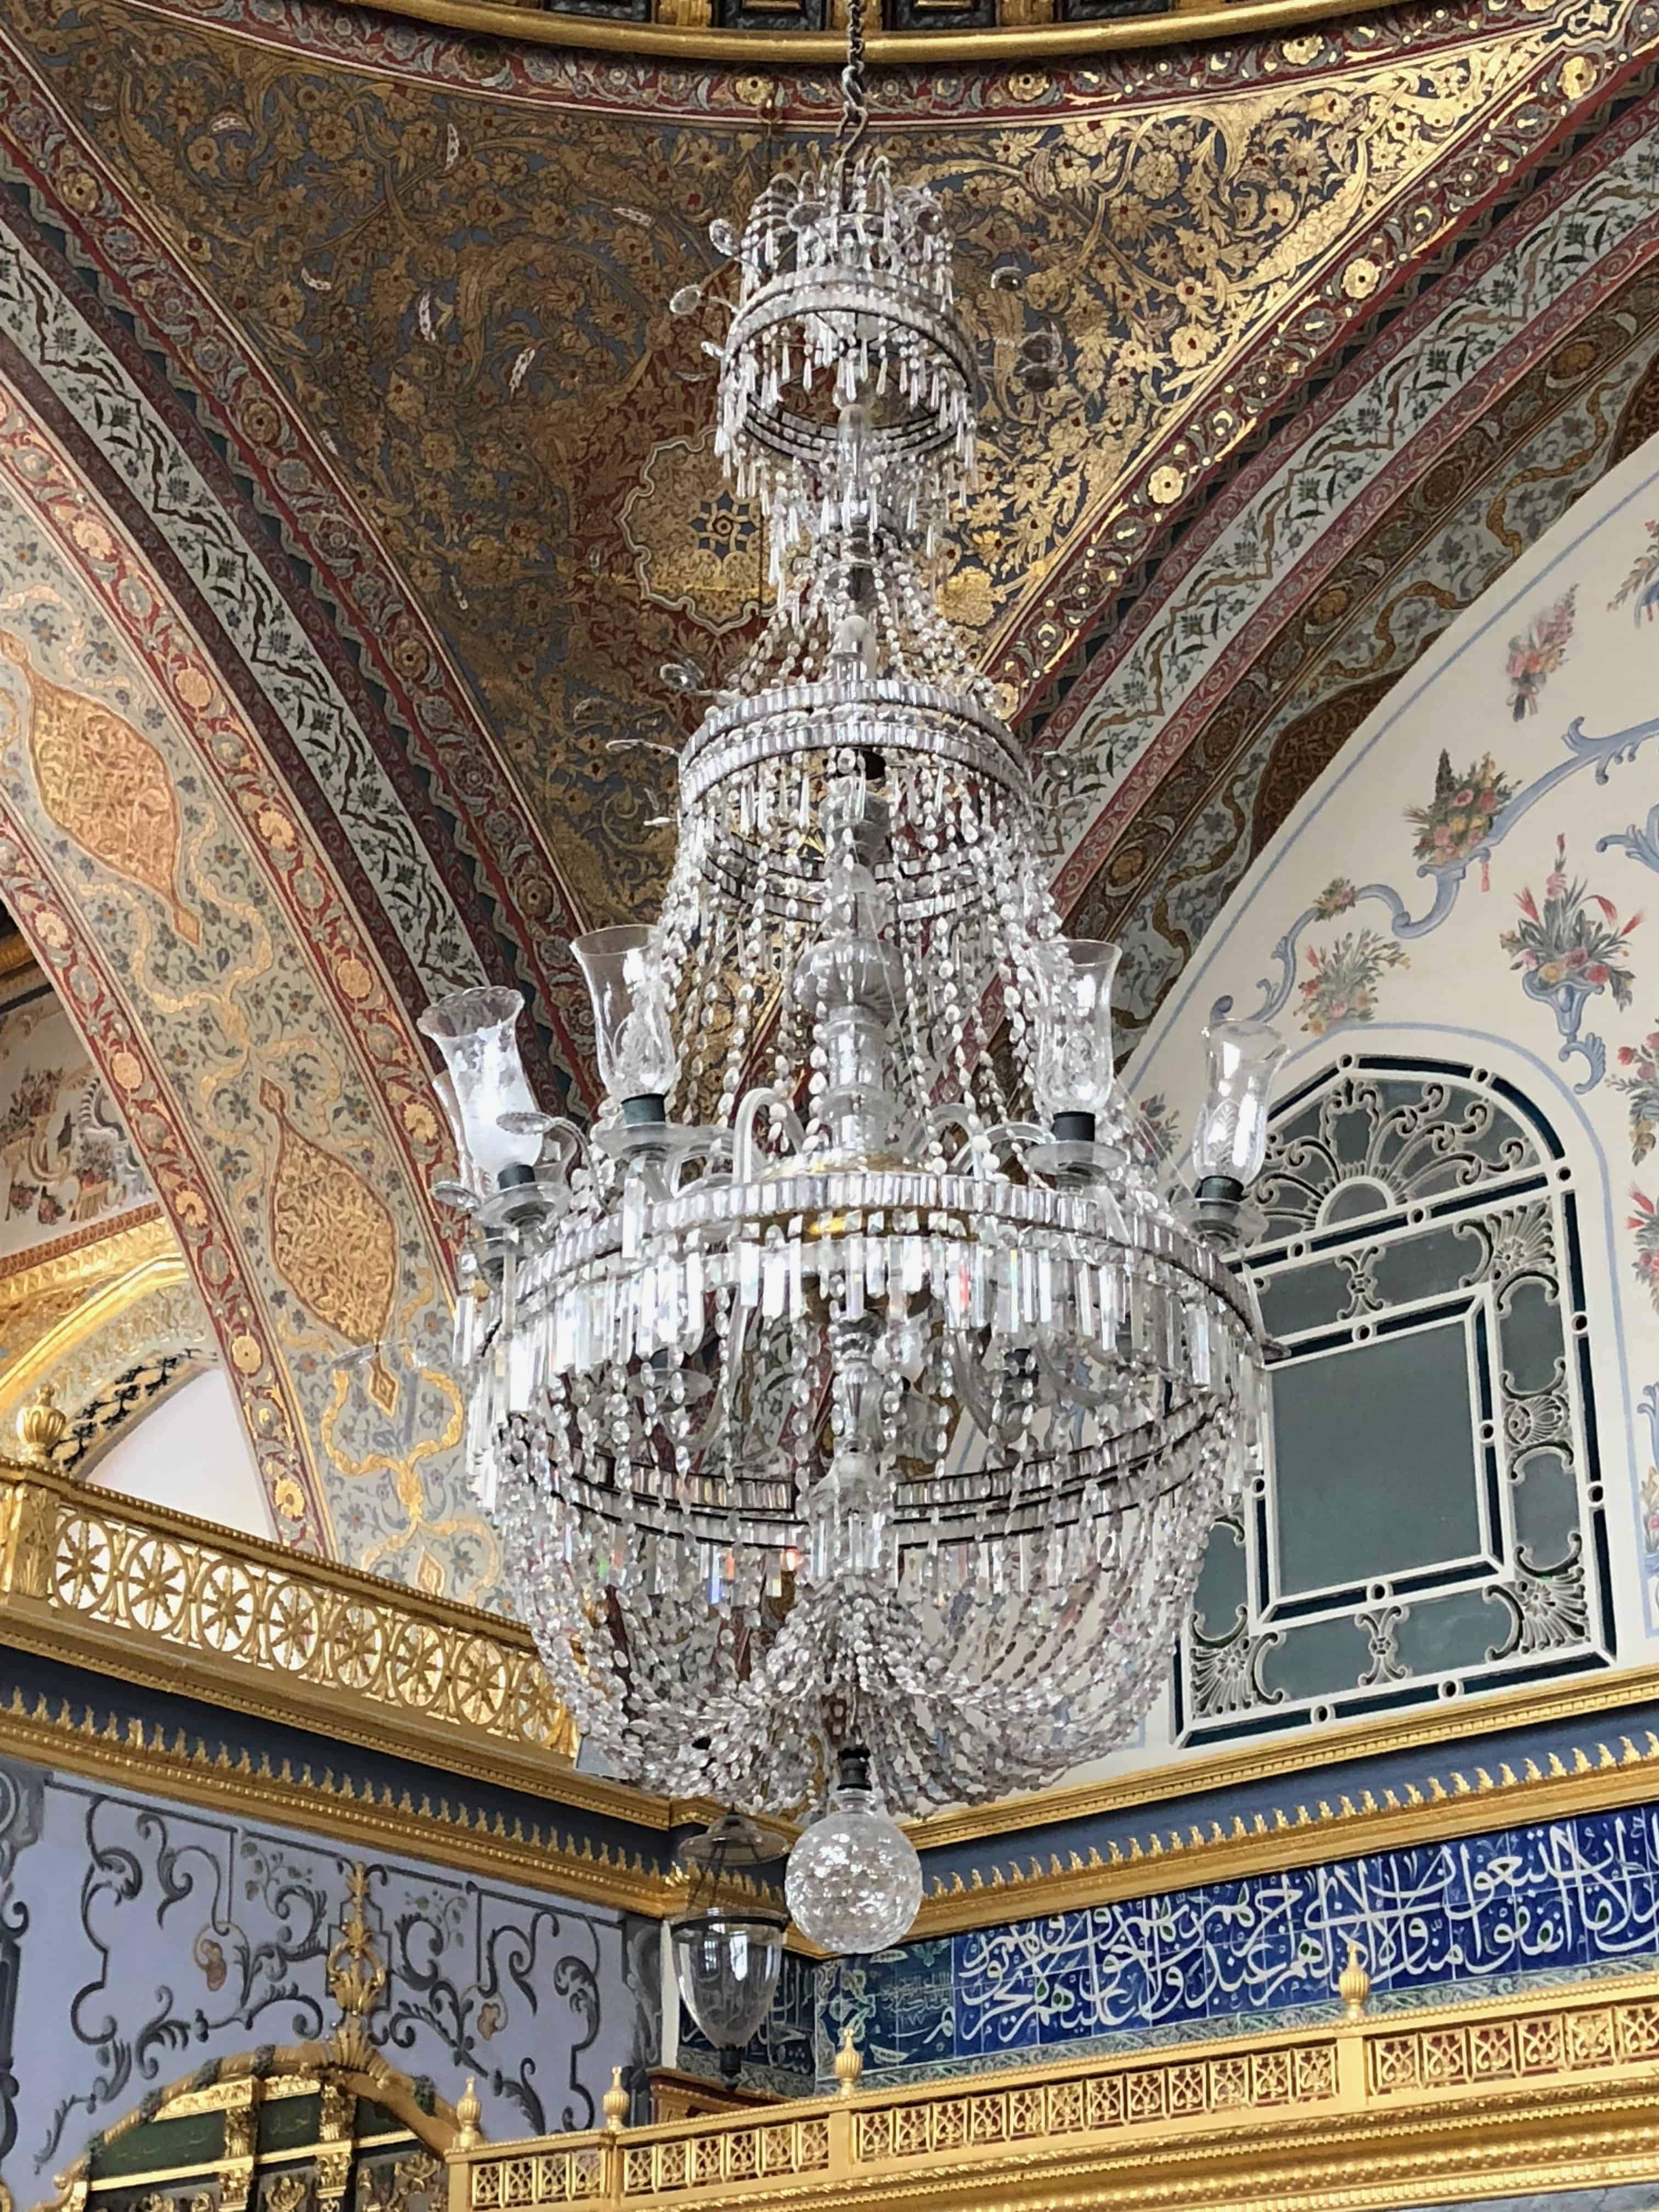 Chandelier in the Imperial Hall in the Imperial Harem at Topkapi Palace in Istanbul, Turkey